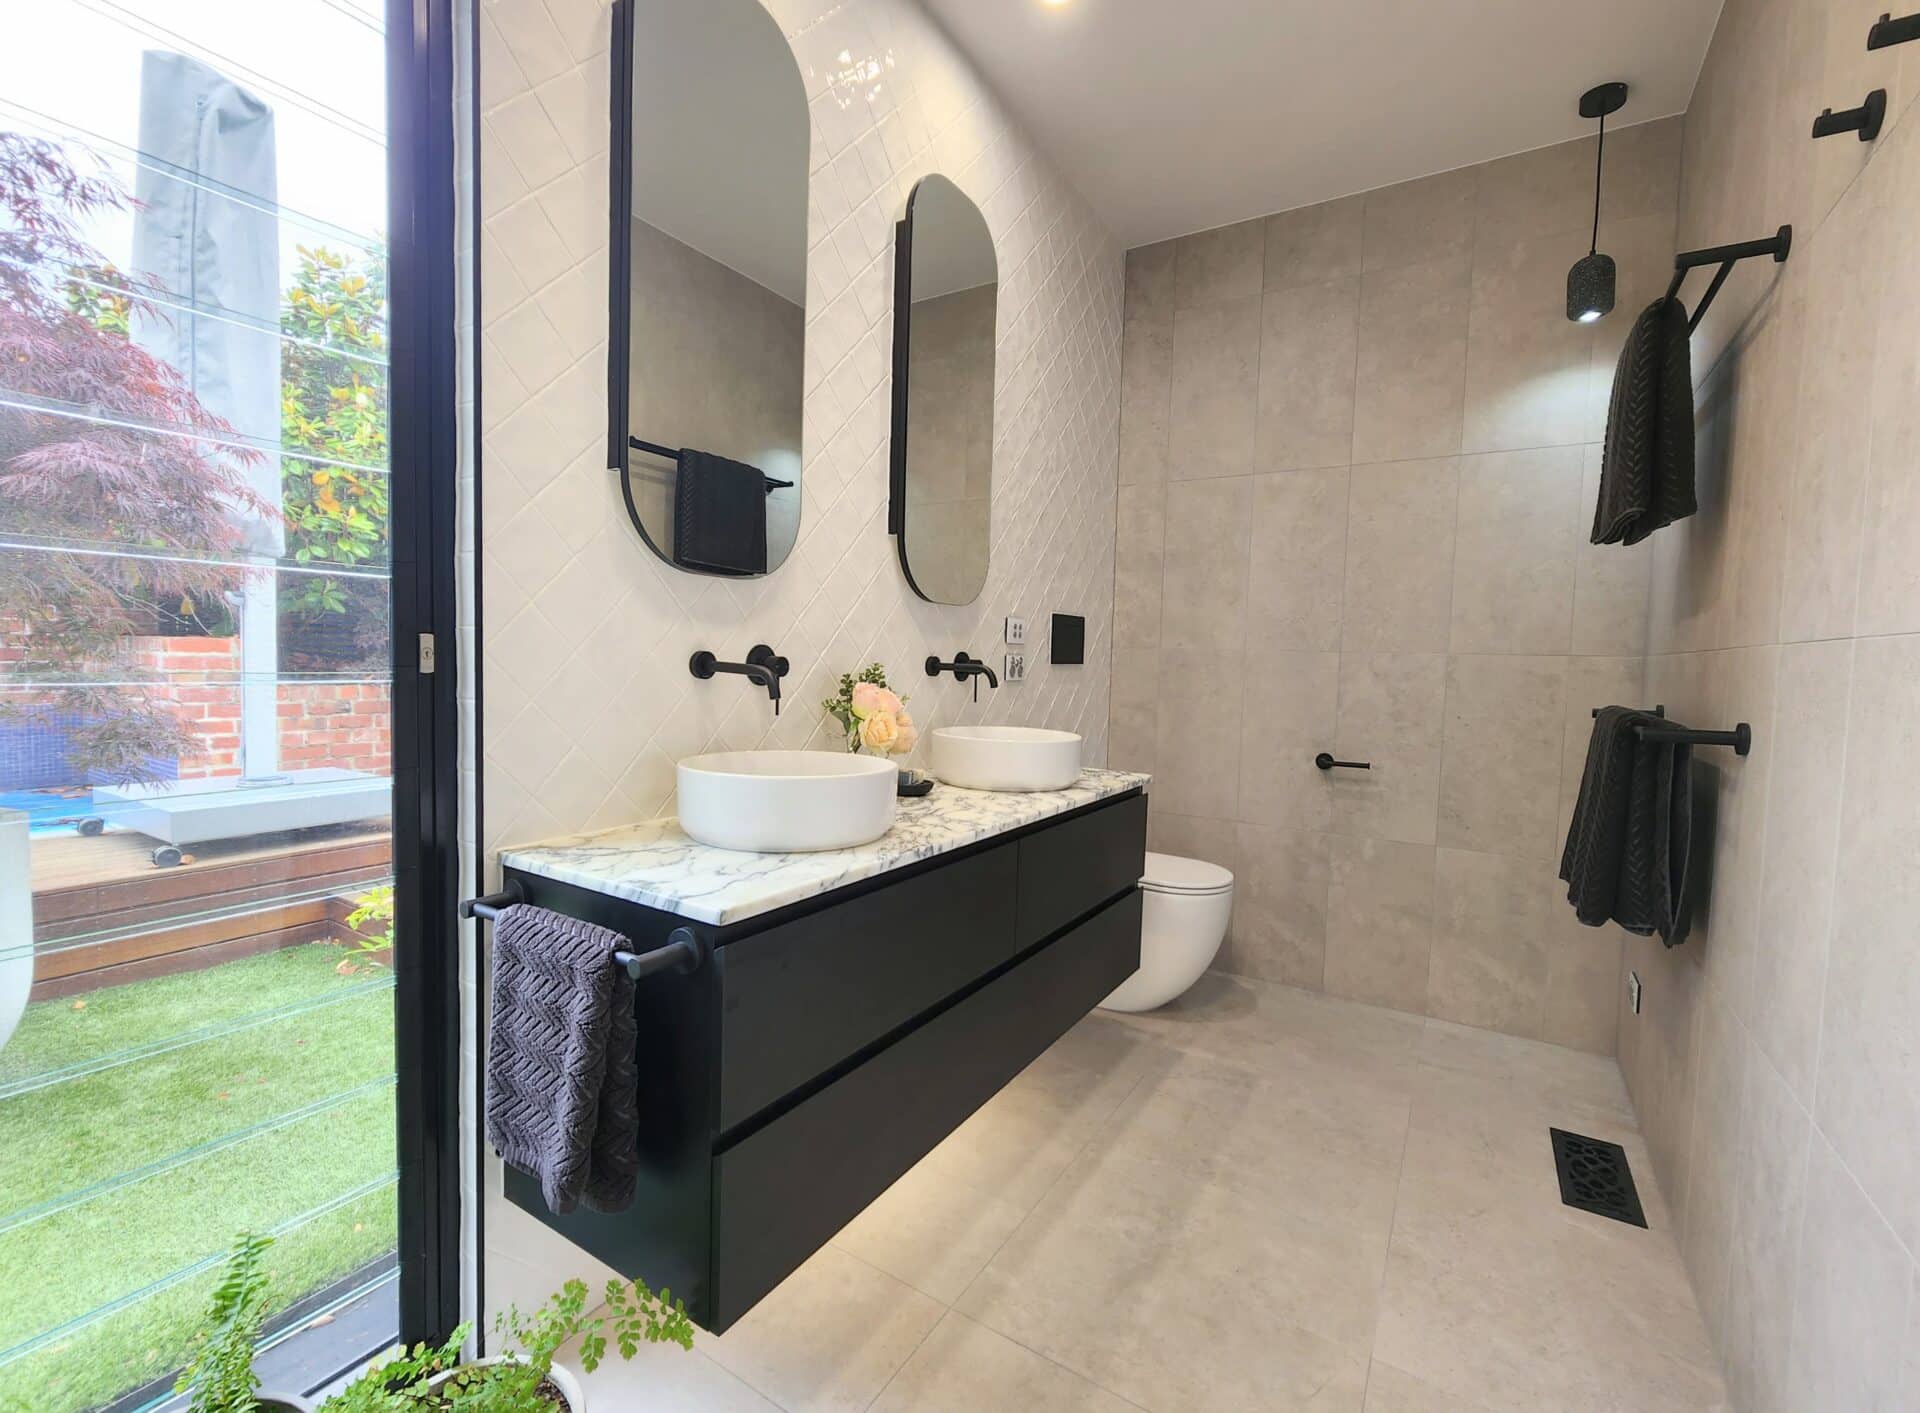 A bathroom with two sinks and a large window.